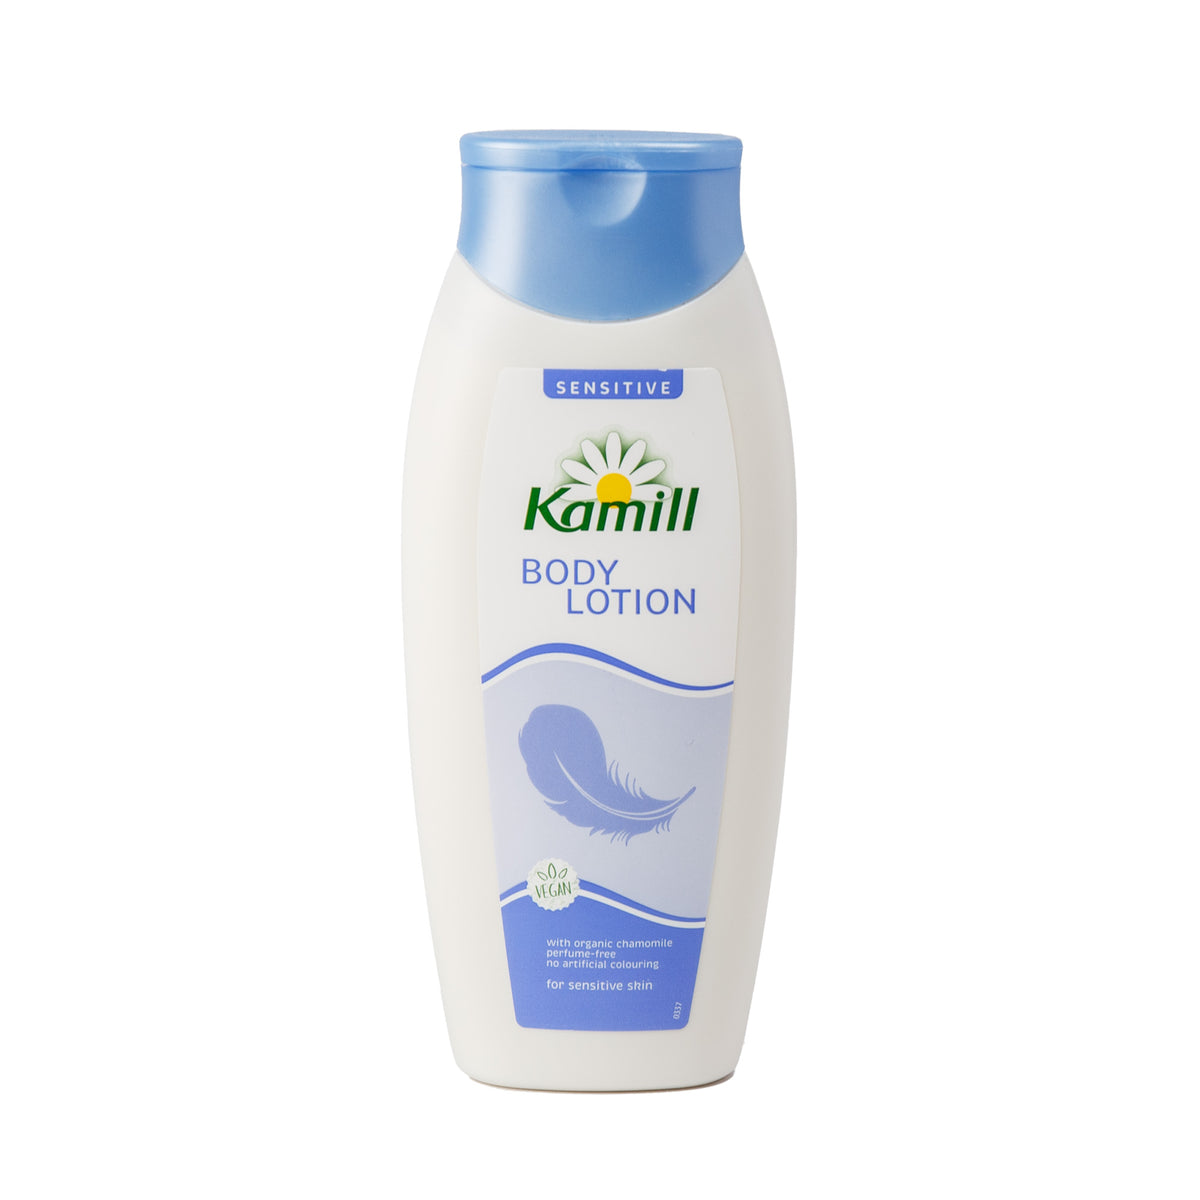 Primary image of Kamill Sensitive Body Lotion